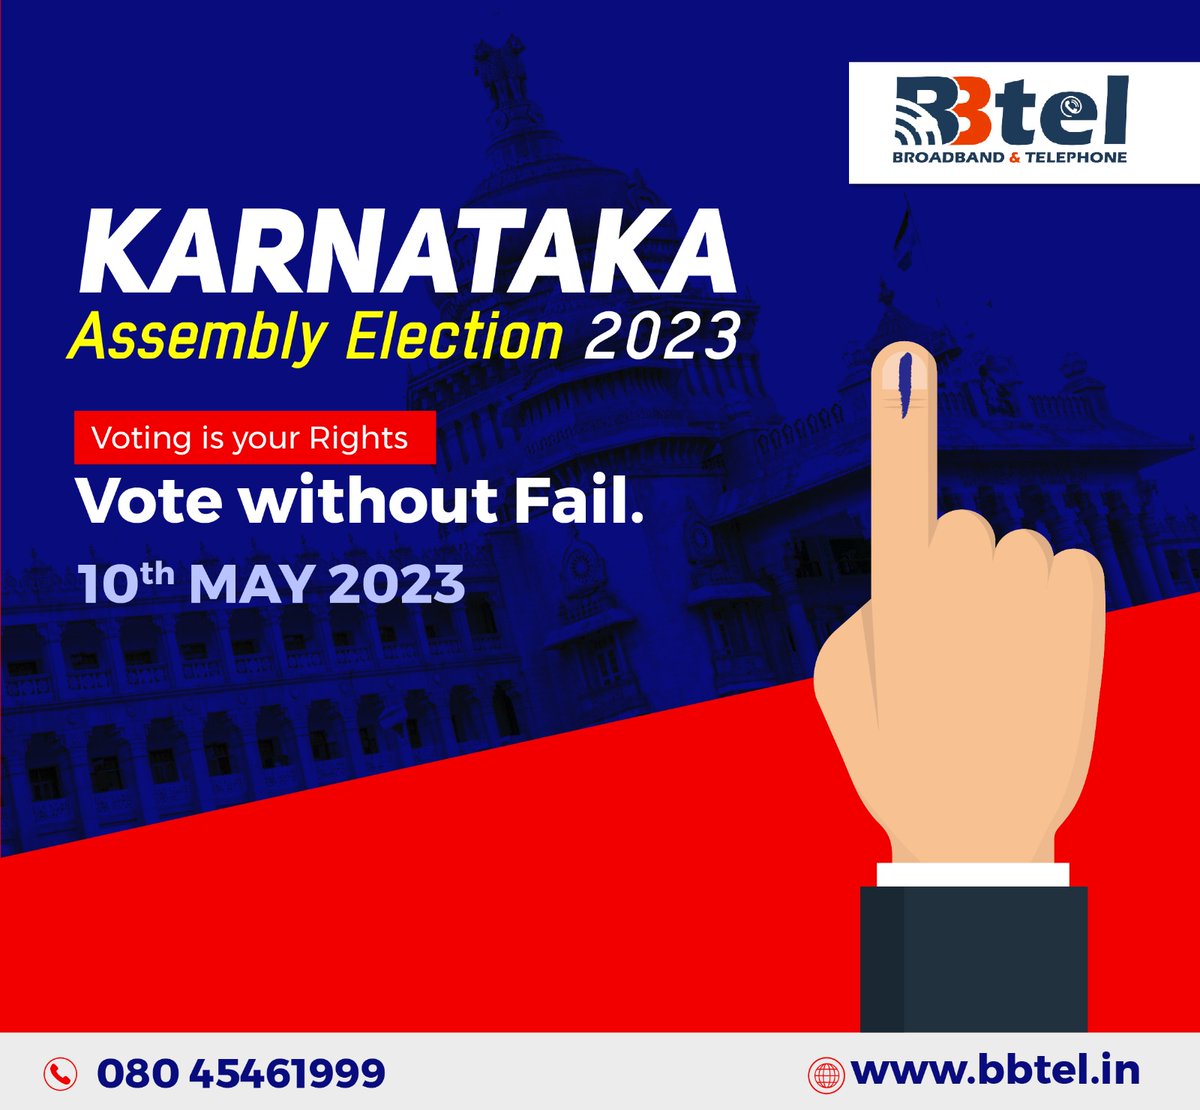 “It's not enough to just want change ... You have to go and make change by voting.'!!!!
#voting  #elections  #VotingRights #ElectionDay2023 #karnatakaelections2023  #broadband #INTERNET   #HighSpeedInternet  #Fastinternet  #InternetConnection #serviceprovider #internetandservice